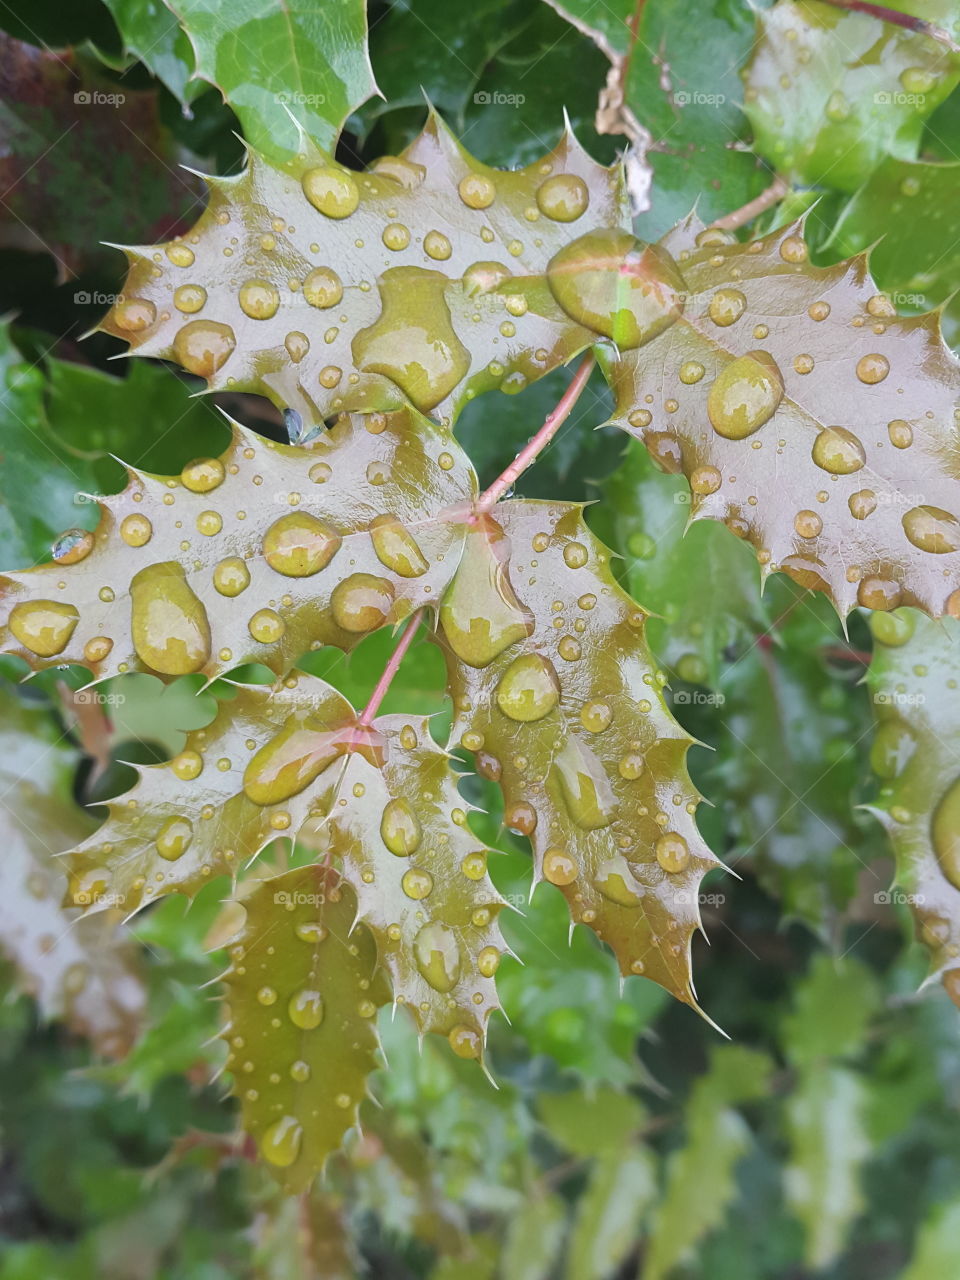 There is always a freshness after the rain. Colours are brighter and clearer and nature seems renewed.  Raindrops left behind make beautiful patterns on these holly leaves